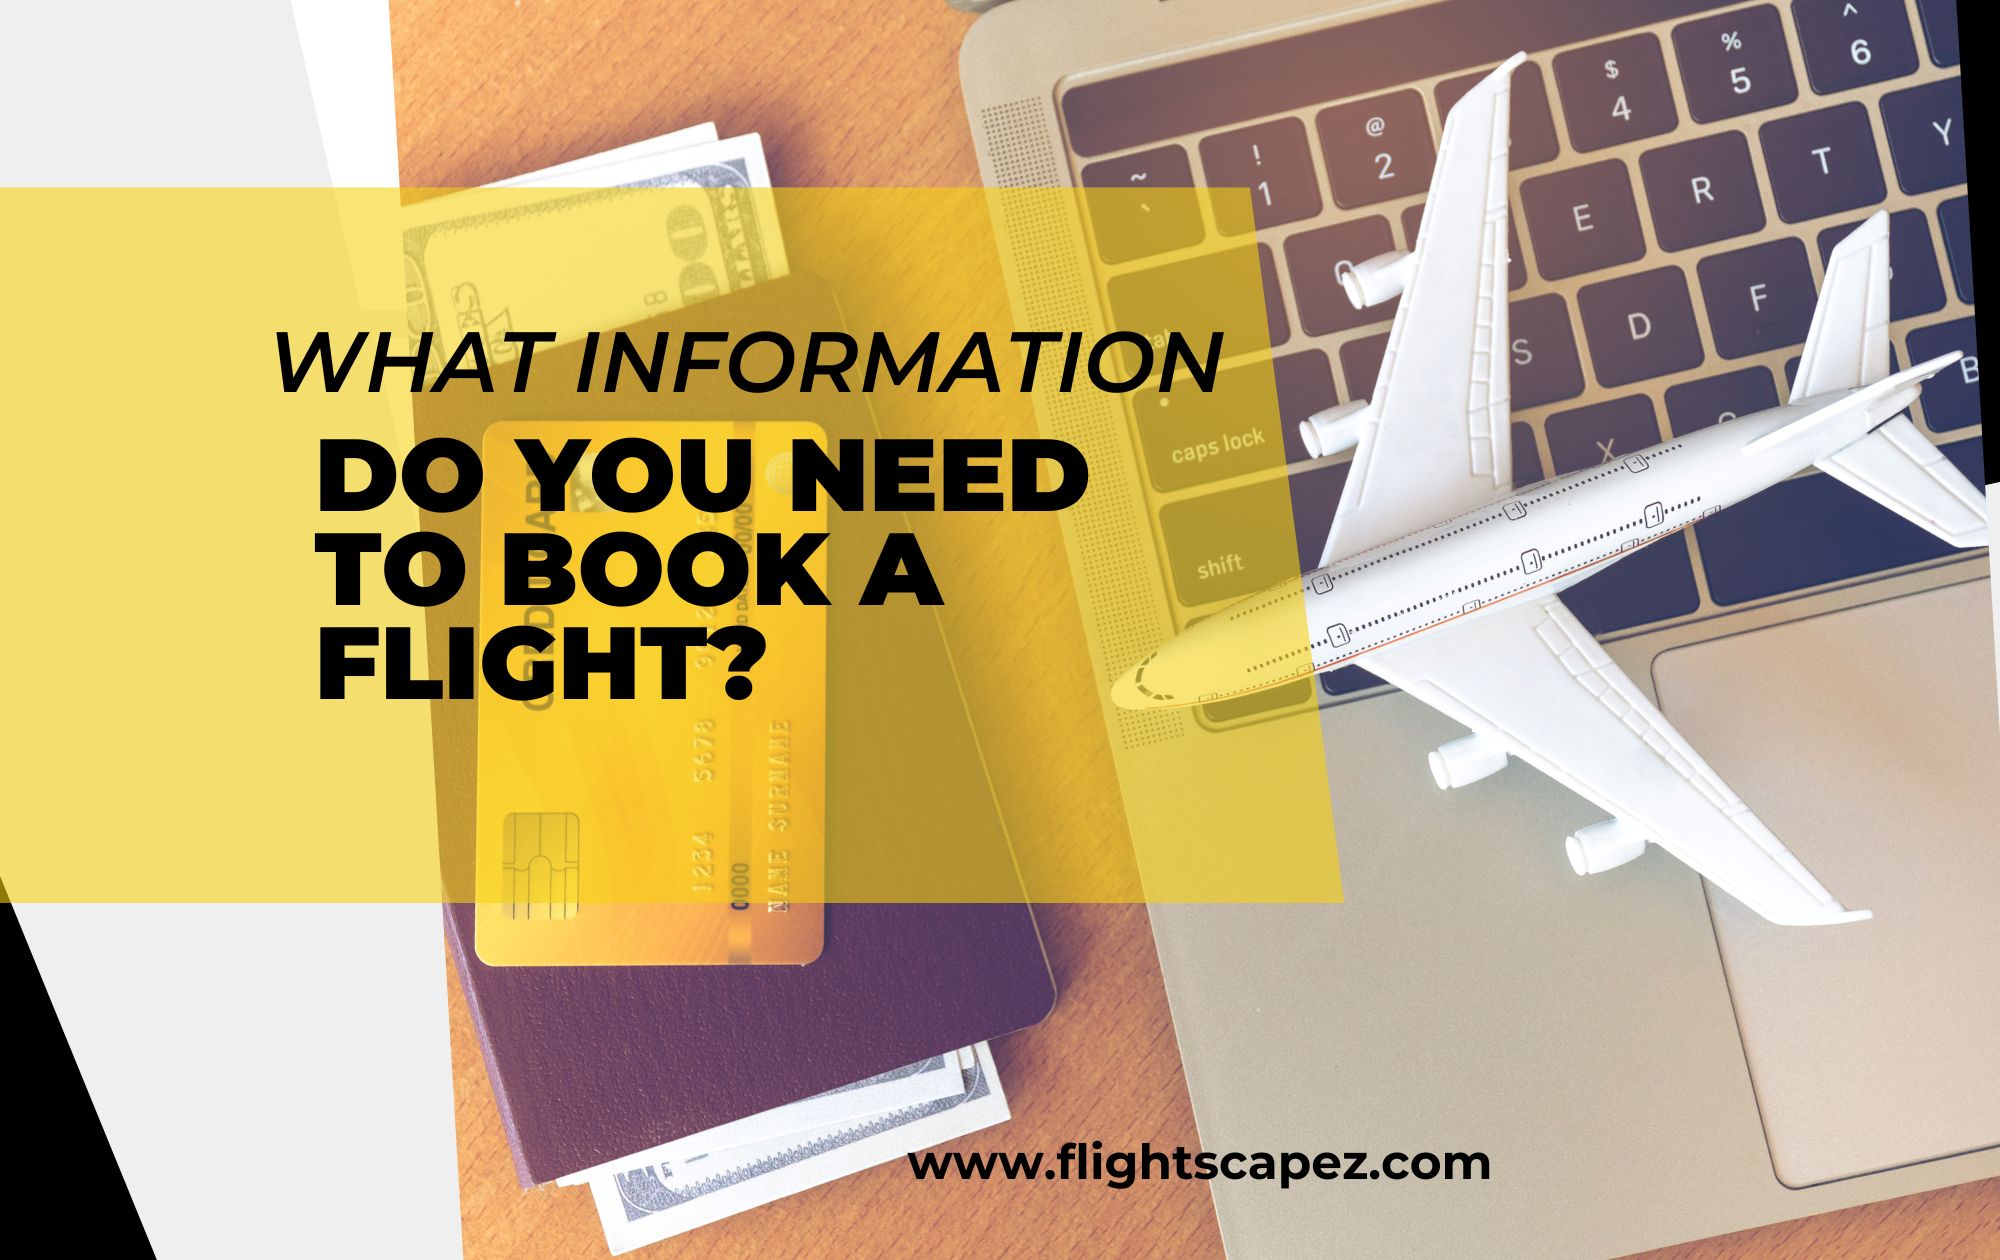 What information do you need to book a flight